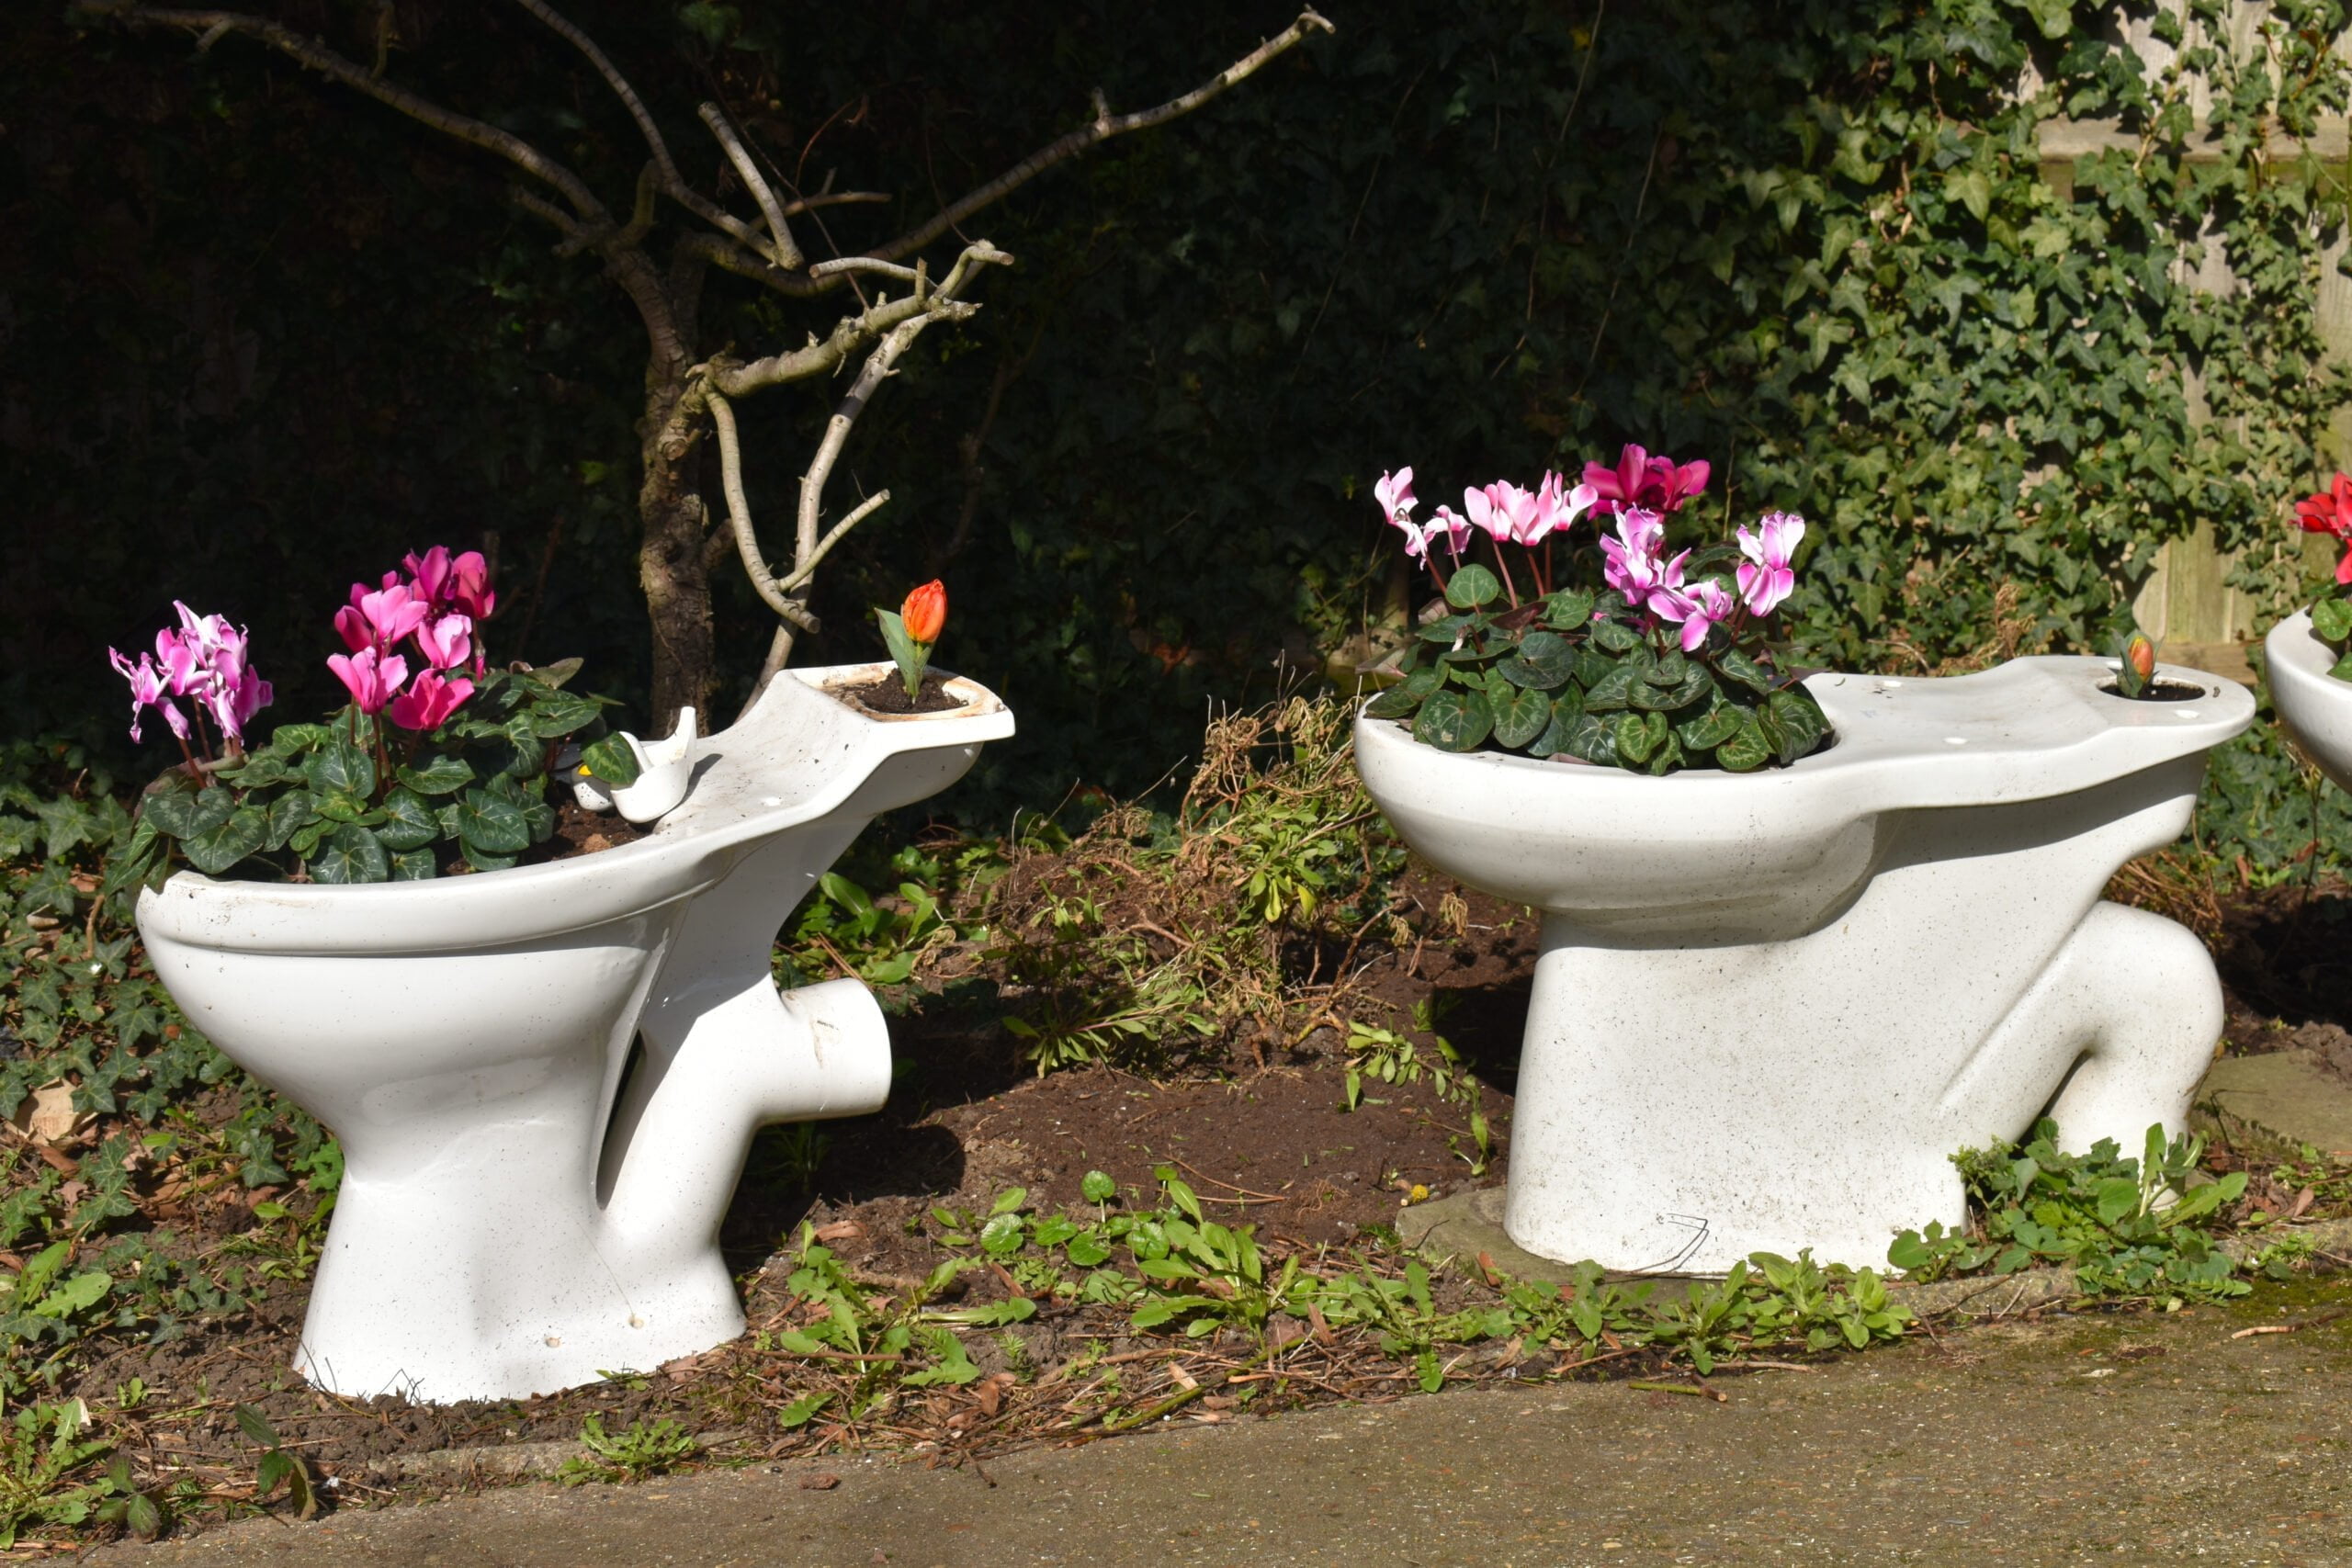 Toilets,Turned,Into,Planters,By,Using,The,Bowl,For,Growing